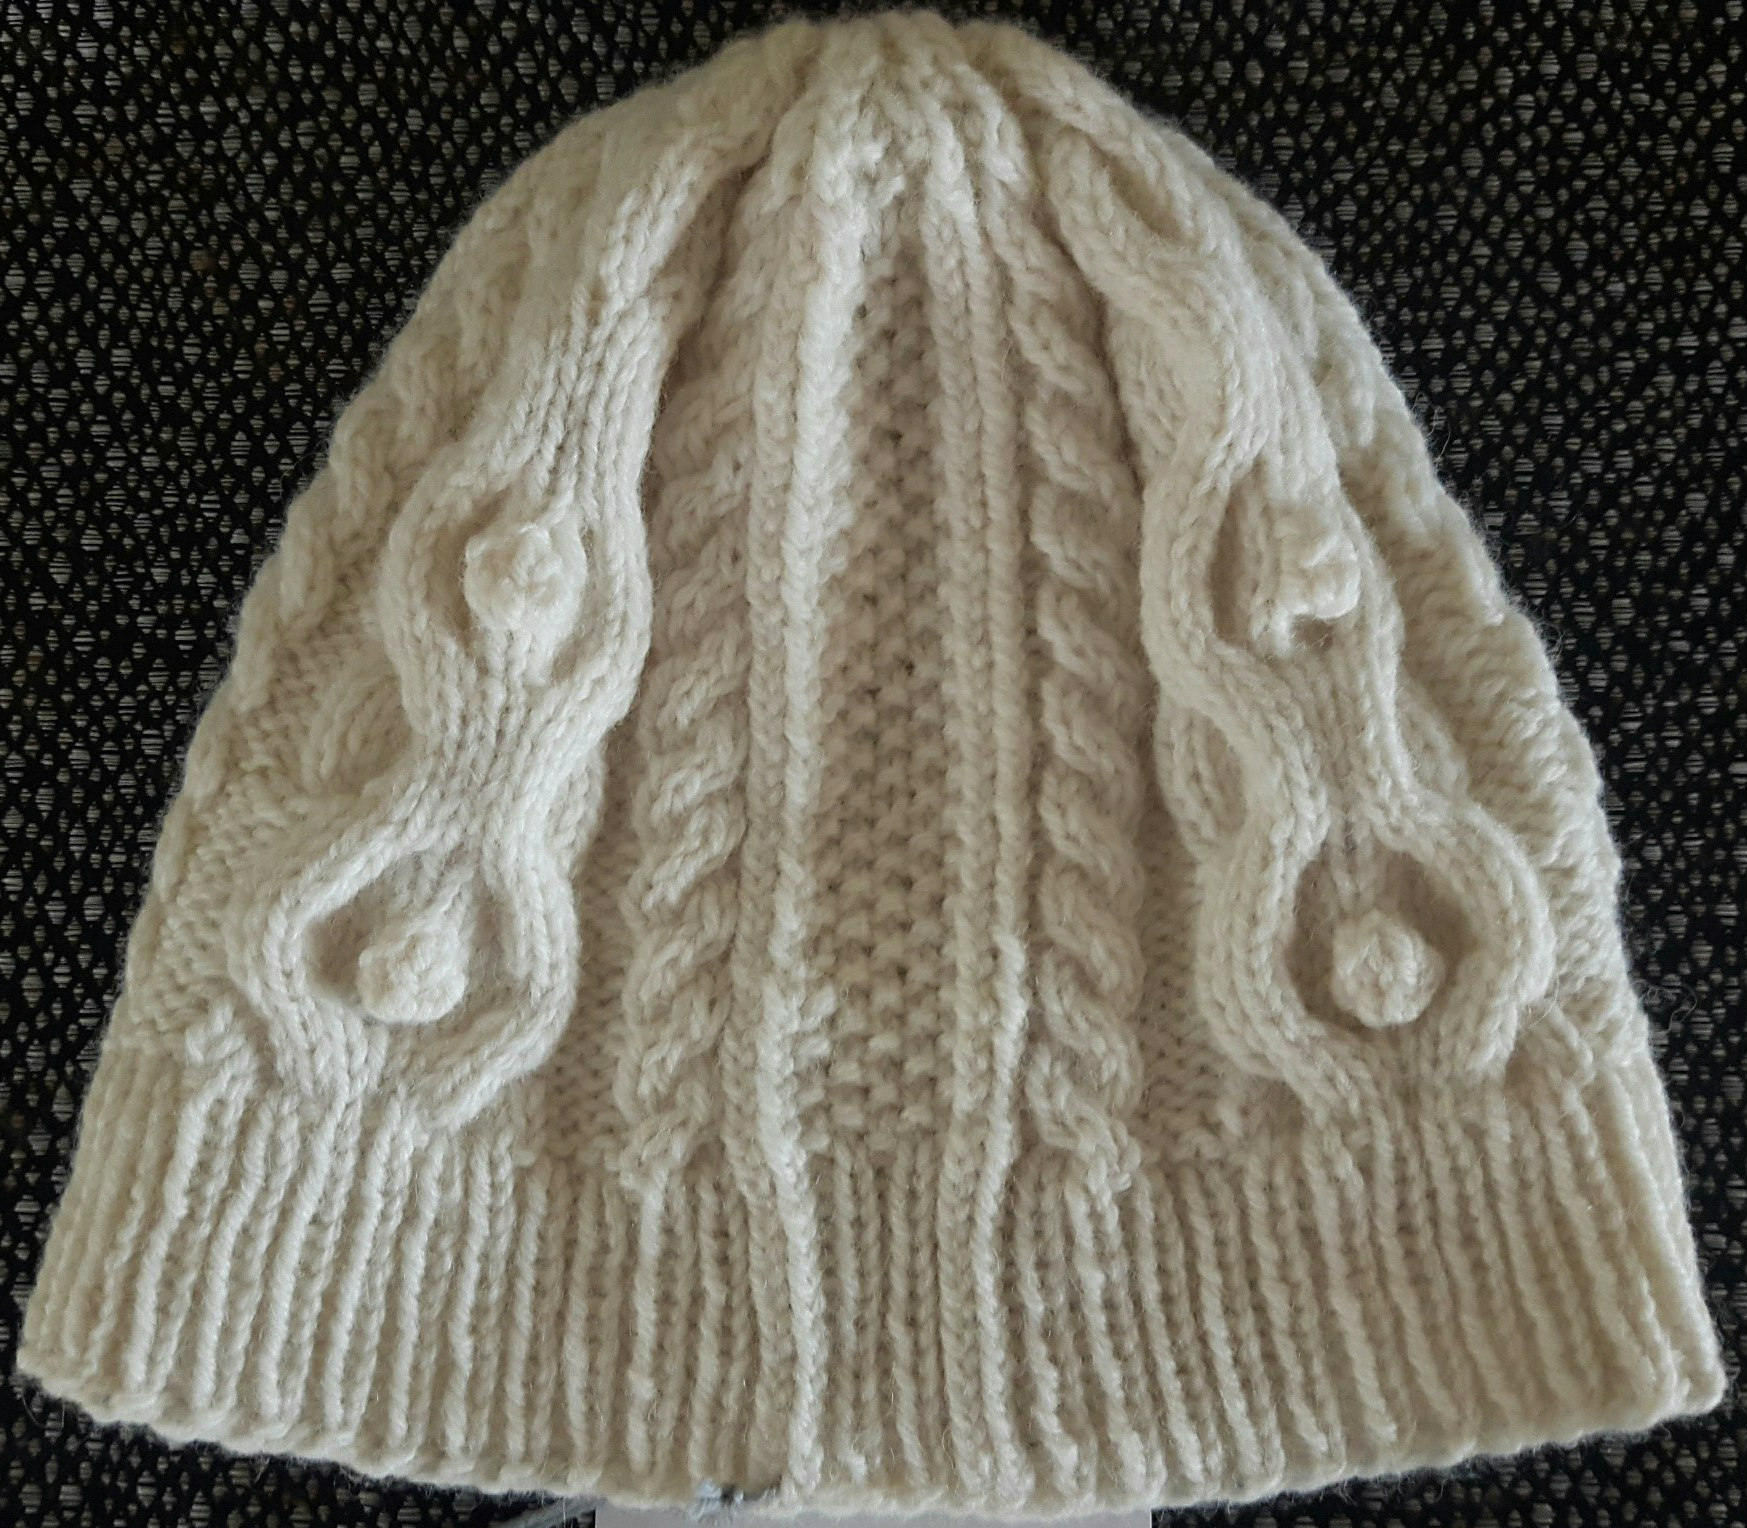 Traditional Cabled Aran Hat Knitting Pattern This Man Knits